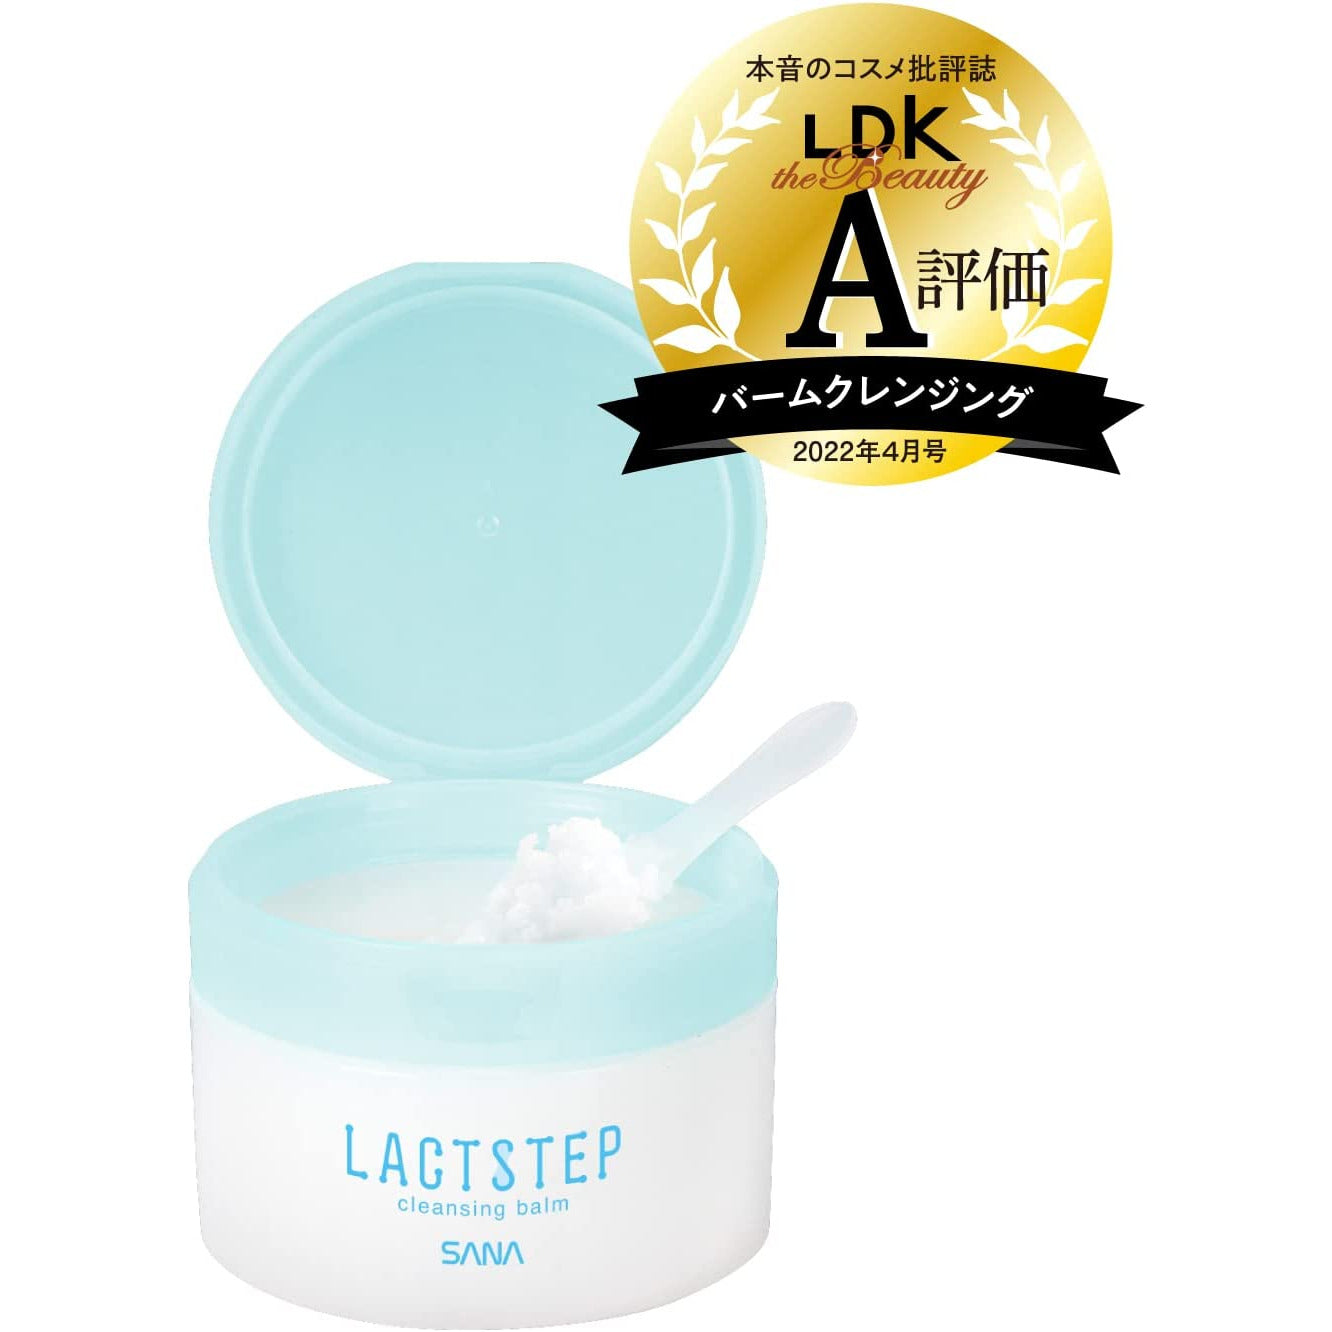 SANA Lactostep Cleansing Balm 95G